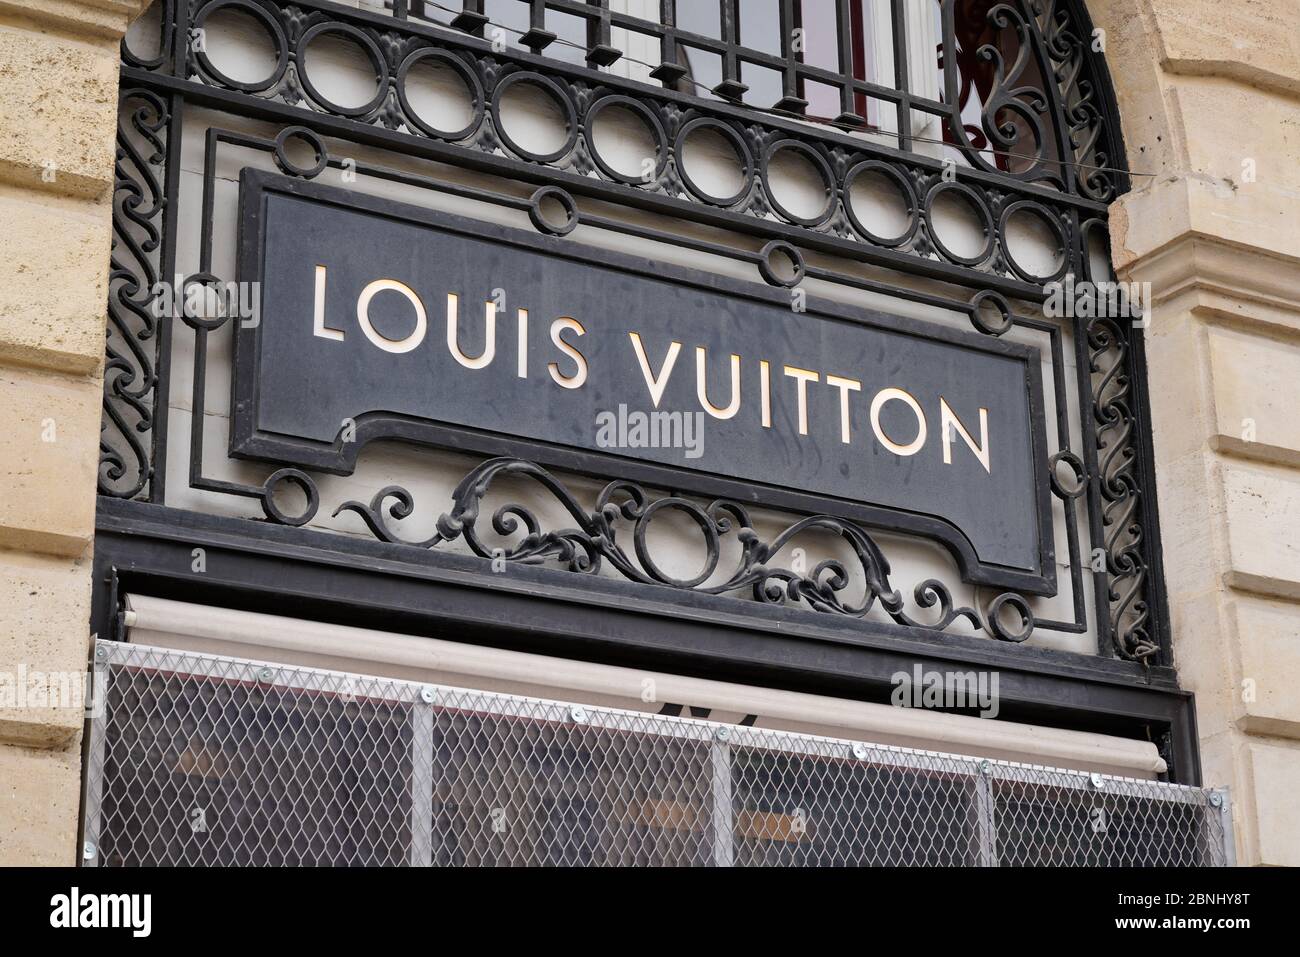 Louis Vuitton Logo on Their Local Shop in Bordeaux. Louis Vuitton is a  Fashion House Manufacturer and Luxury Retail Company Editorial Photography  - Image of bordeaux, architecture: 108852642